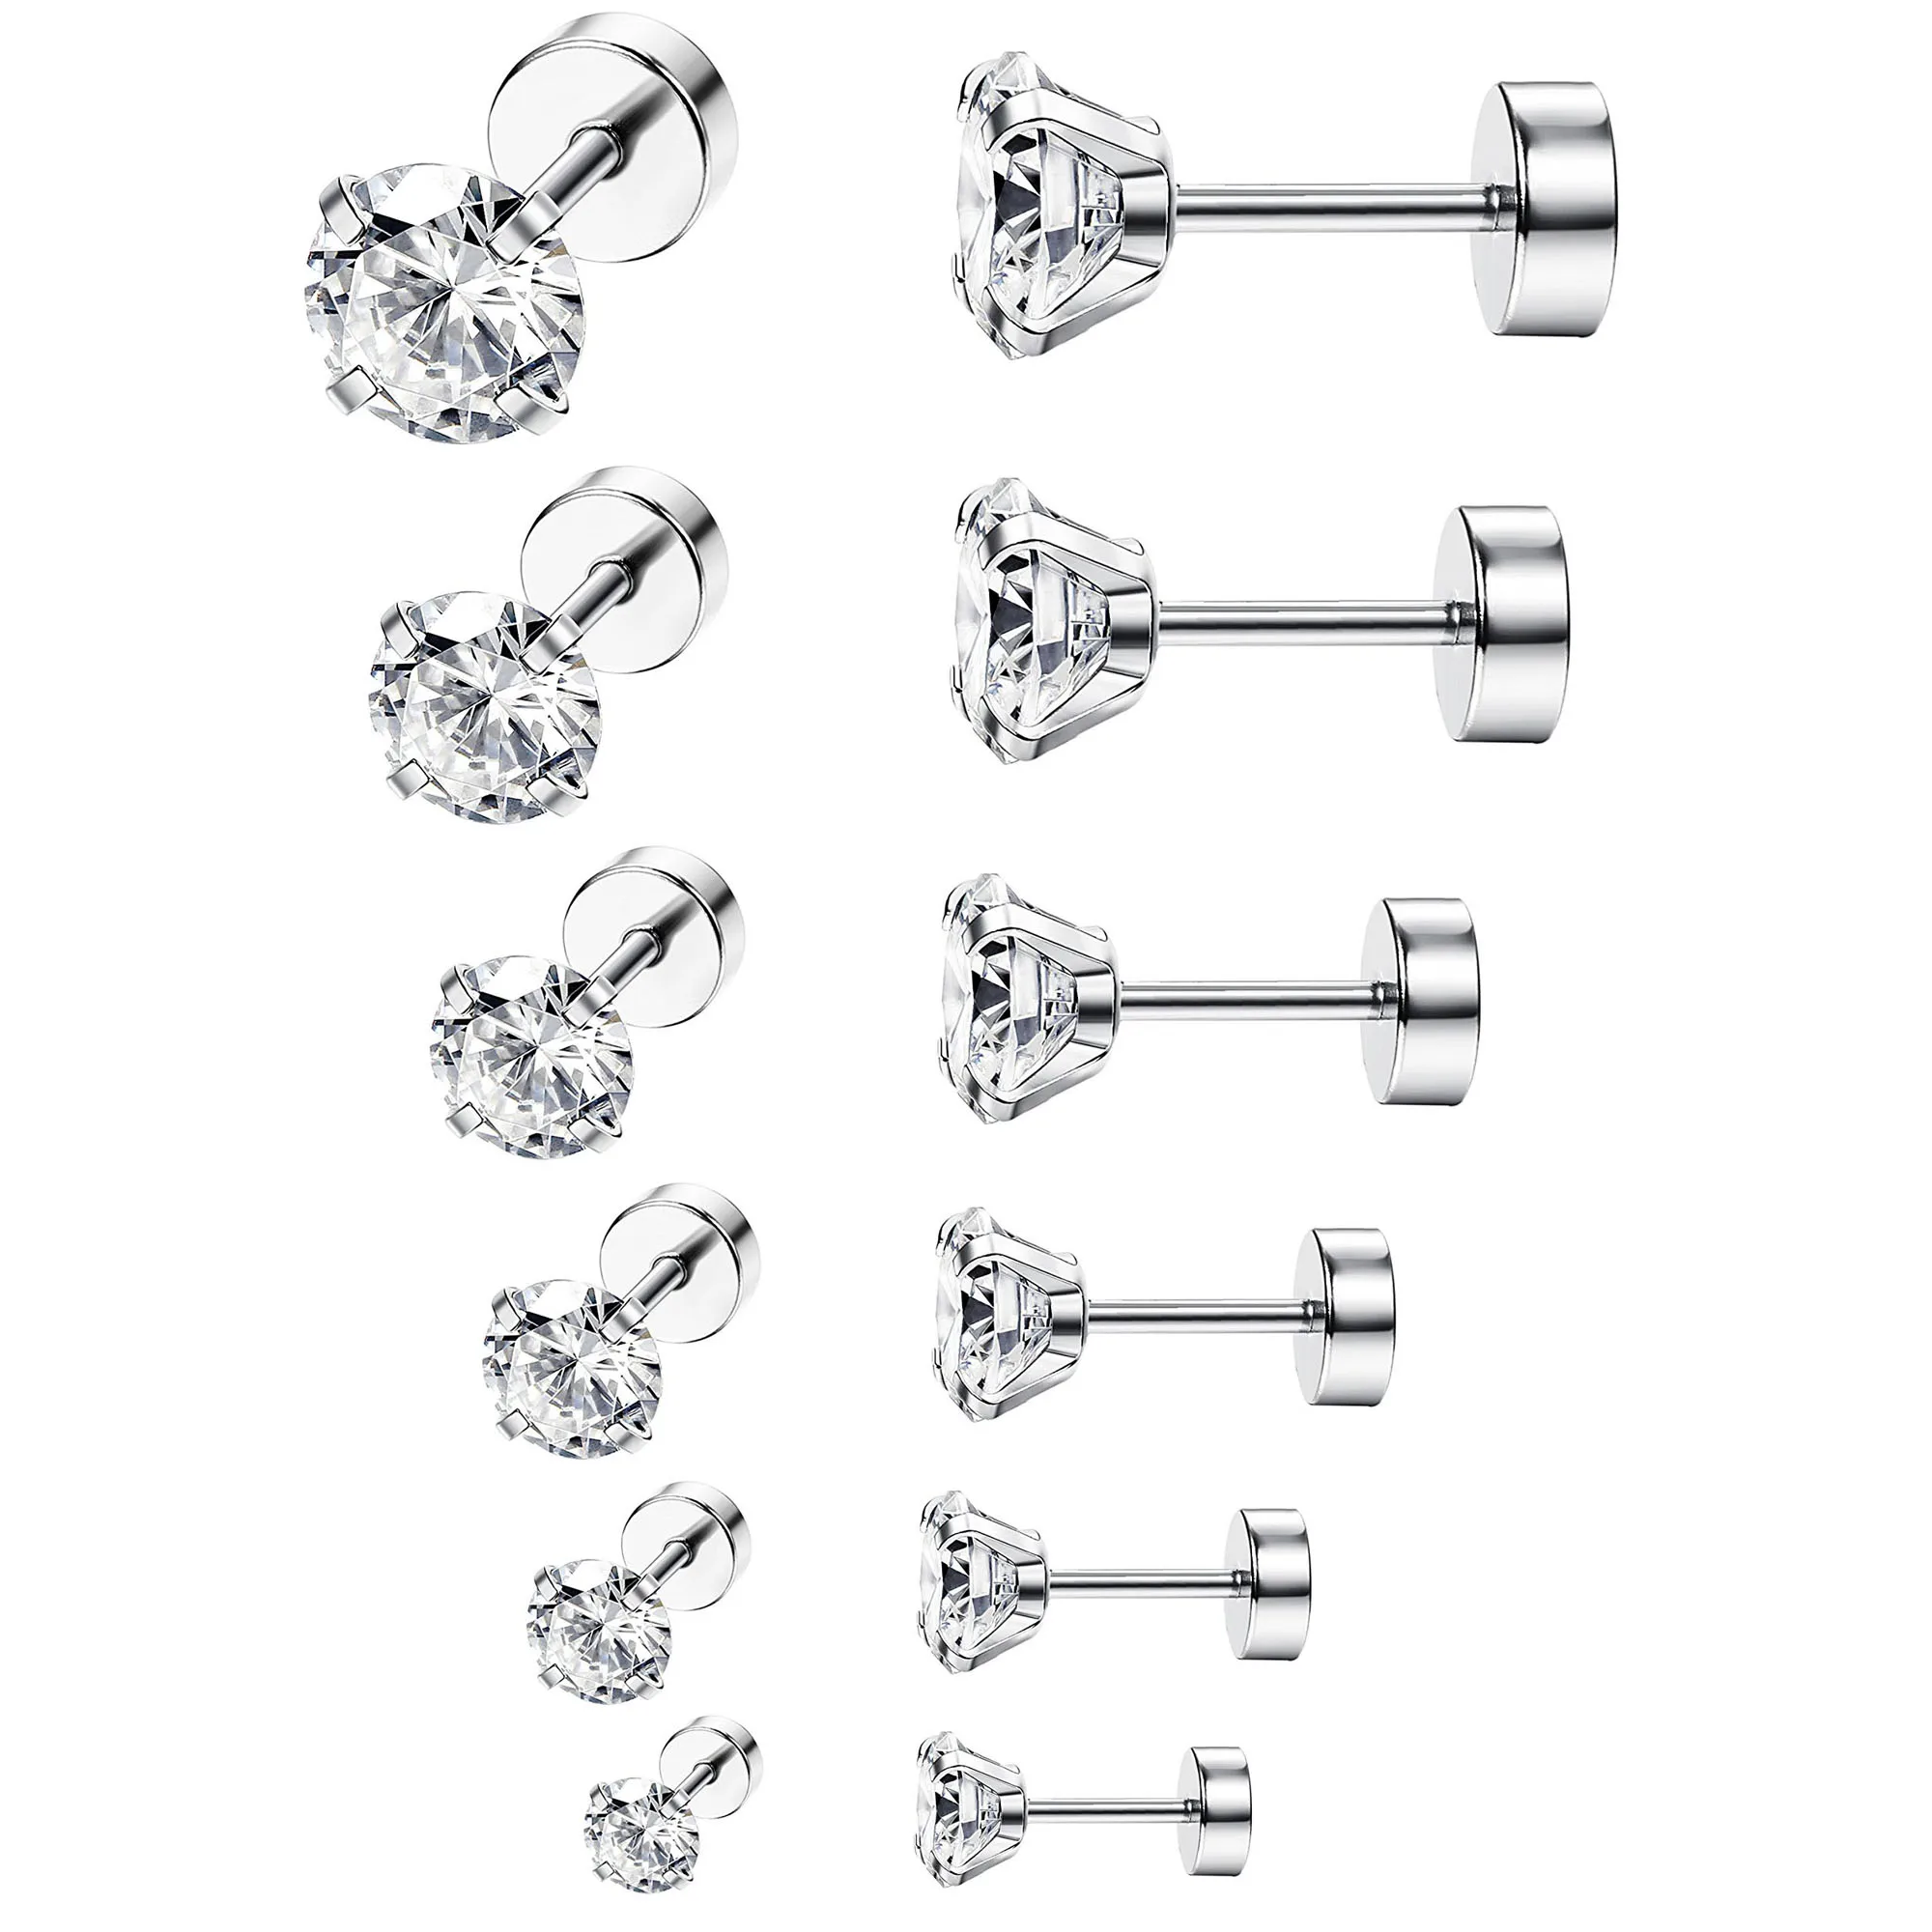 

Pack of 6 Pairs Unisex Titanium Stainless Steel Cubic Zirconia Screw Back Earrings Hypoallergenic for Sensitive Ears 3-8mm